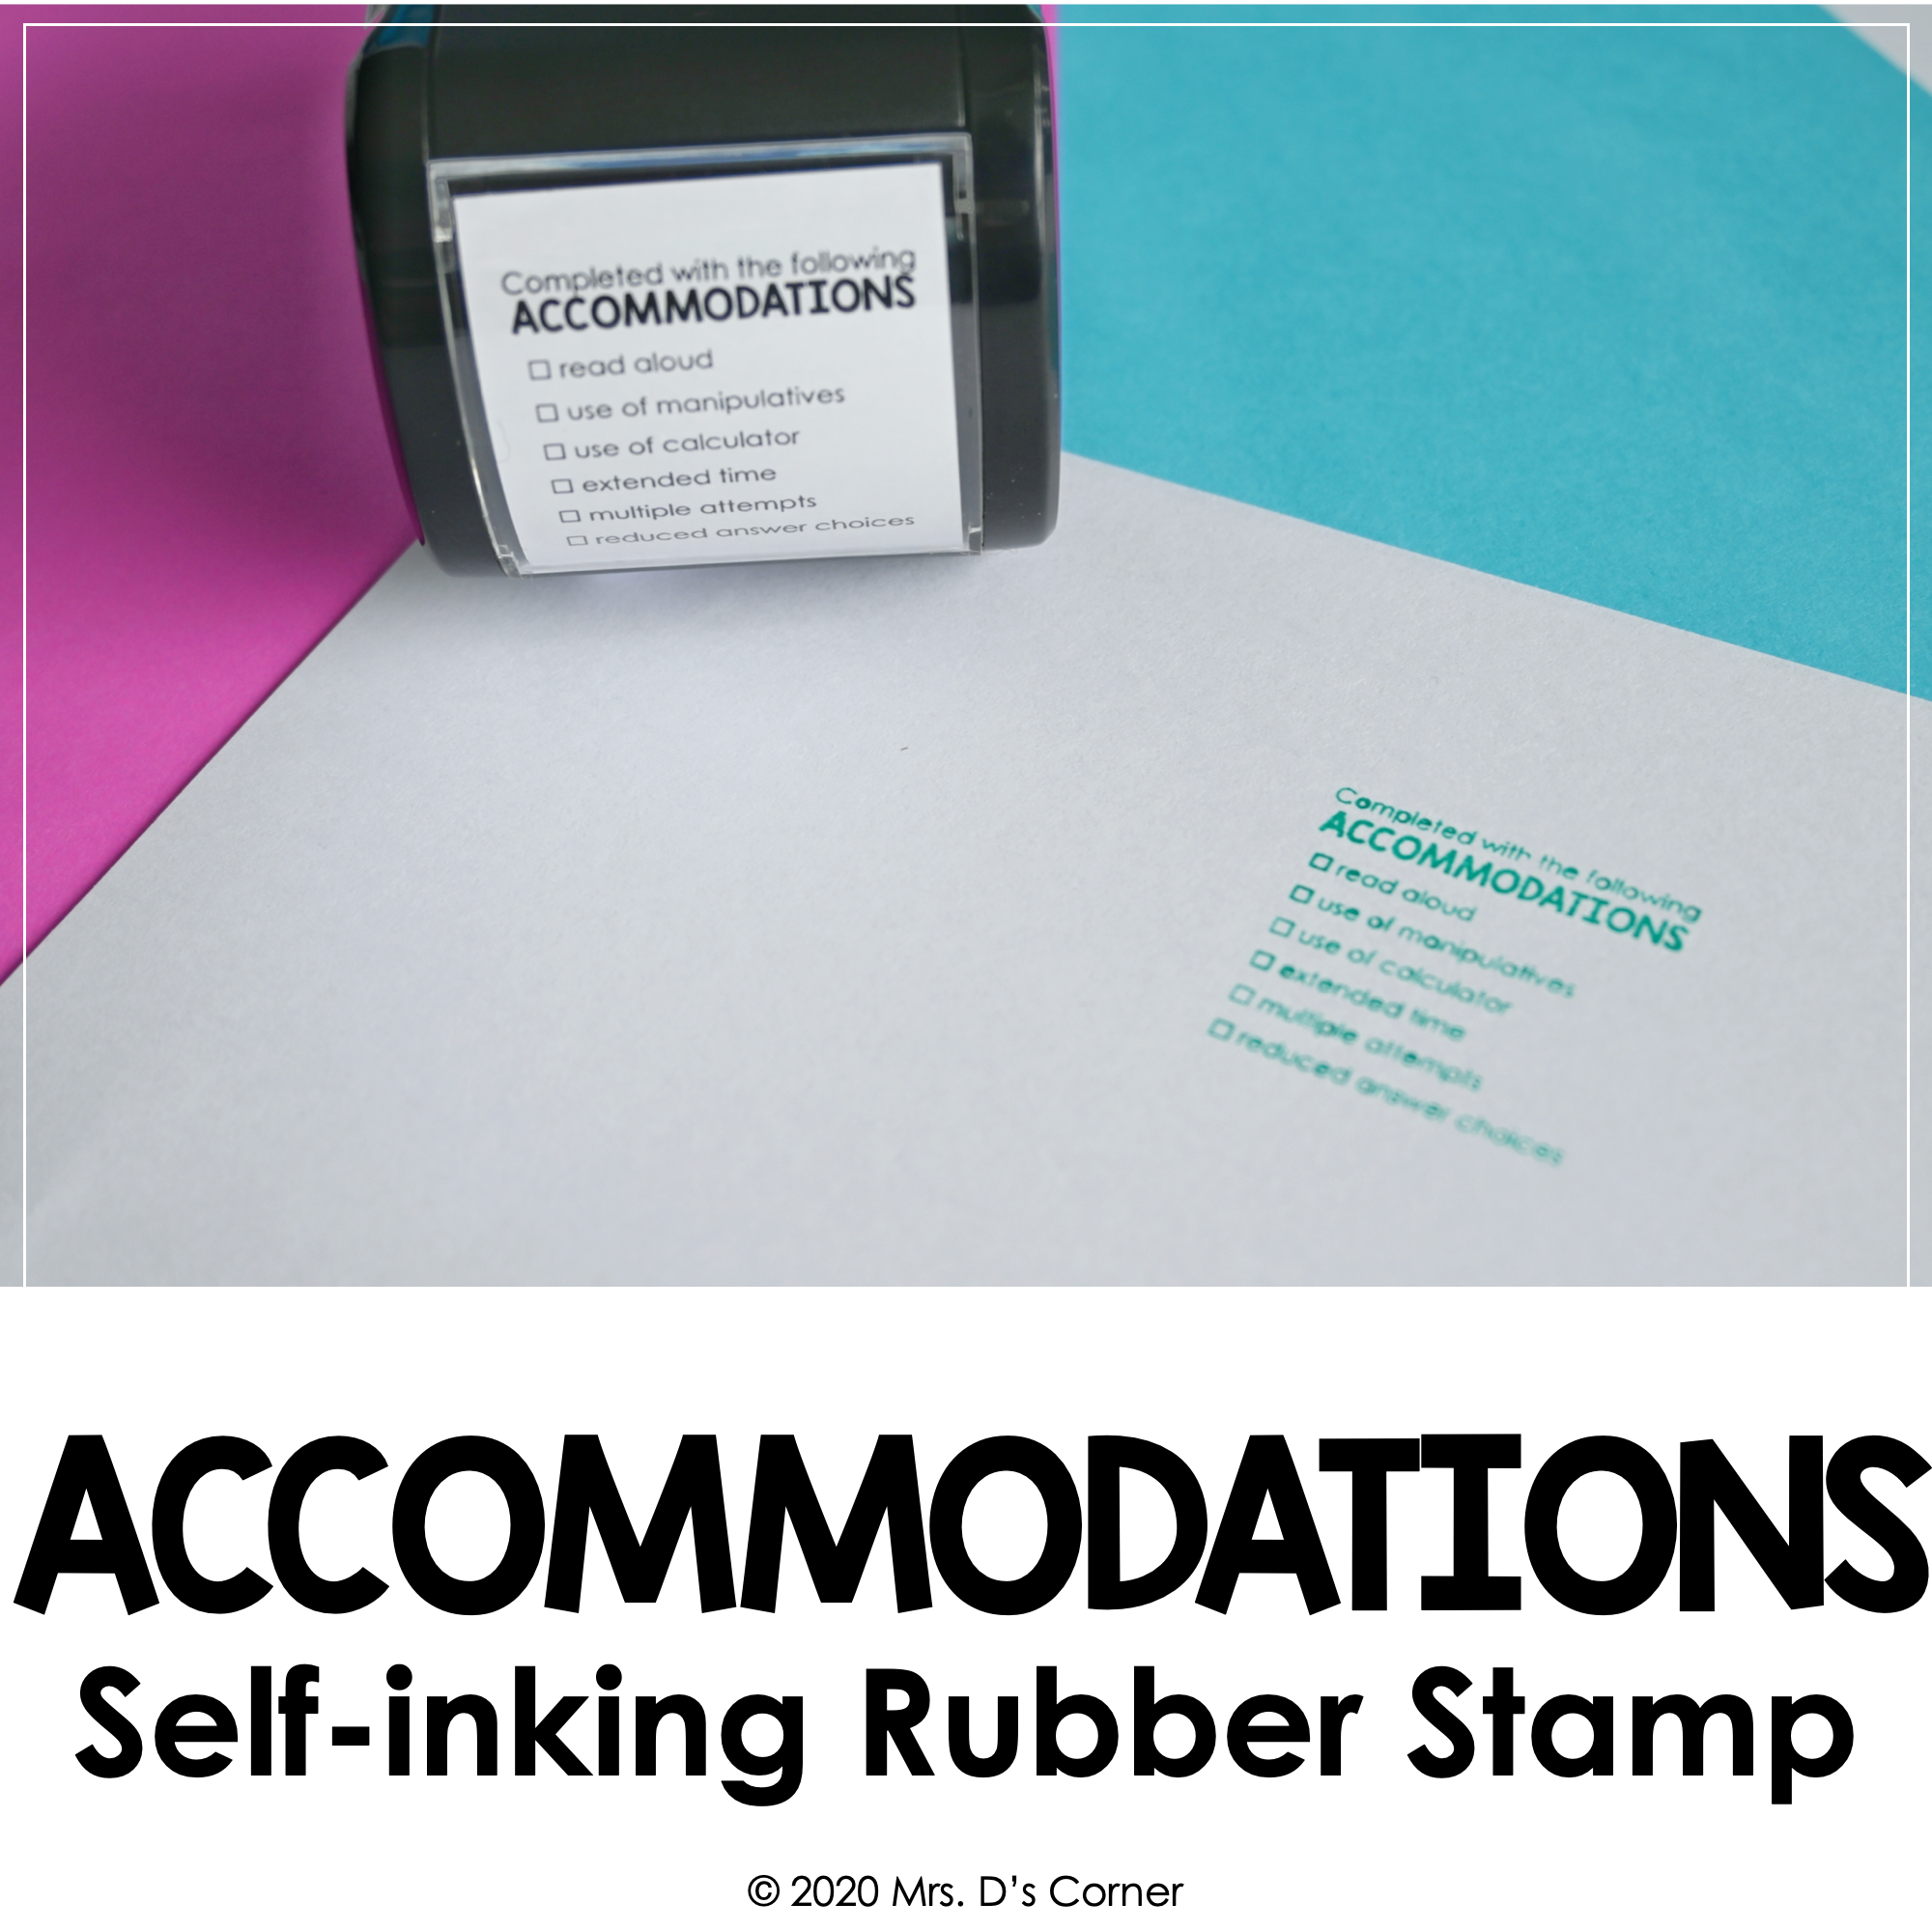 Small Self-Inking Stamps for Companies - Stikets